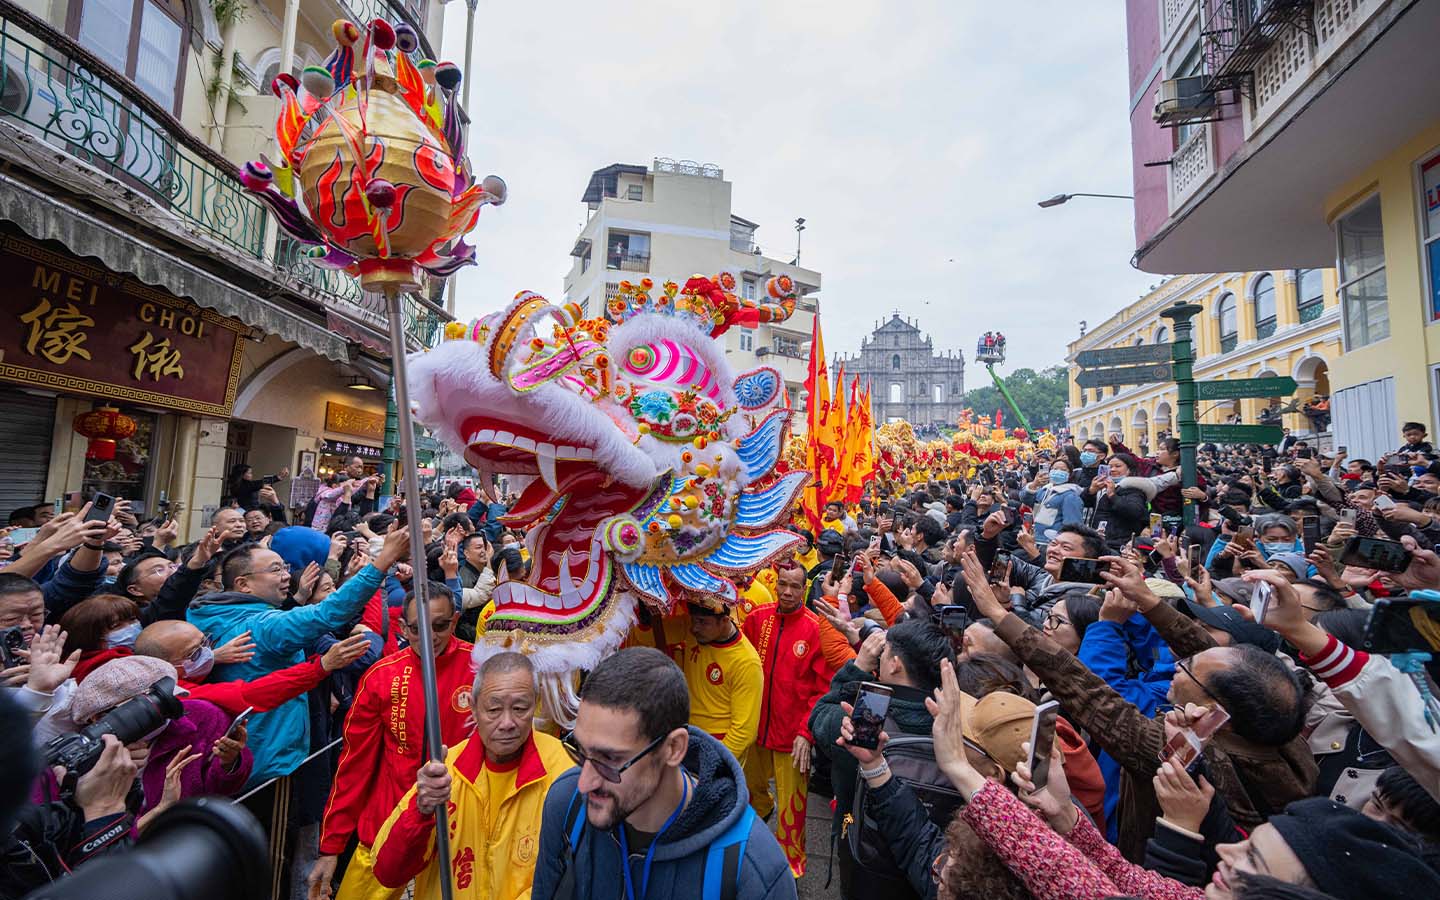 Macao narrows the tourism gap with Hong Kong over Chinese New Year